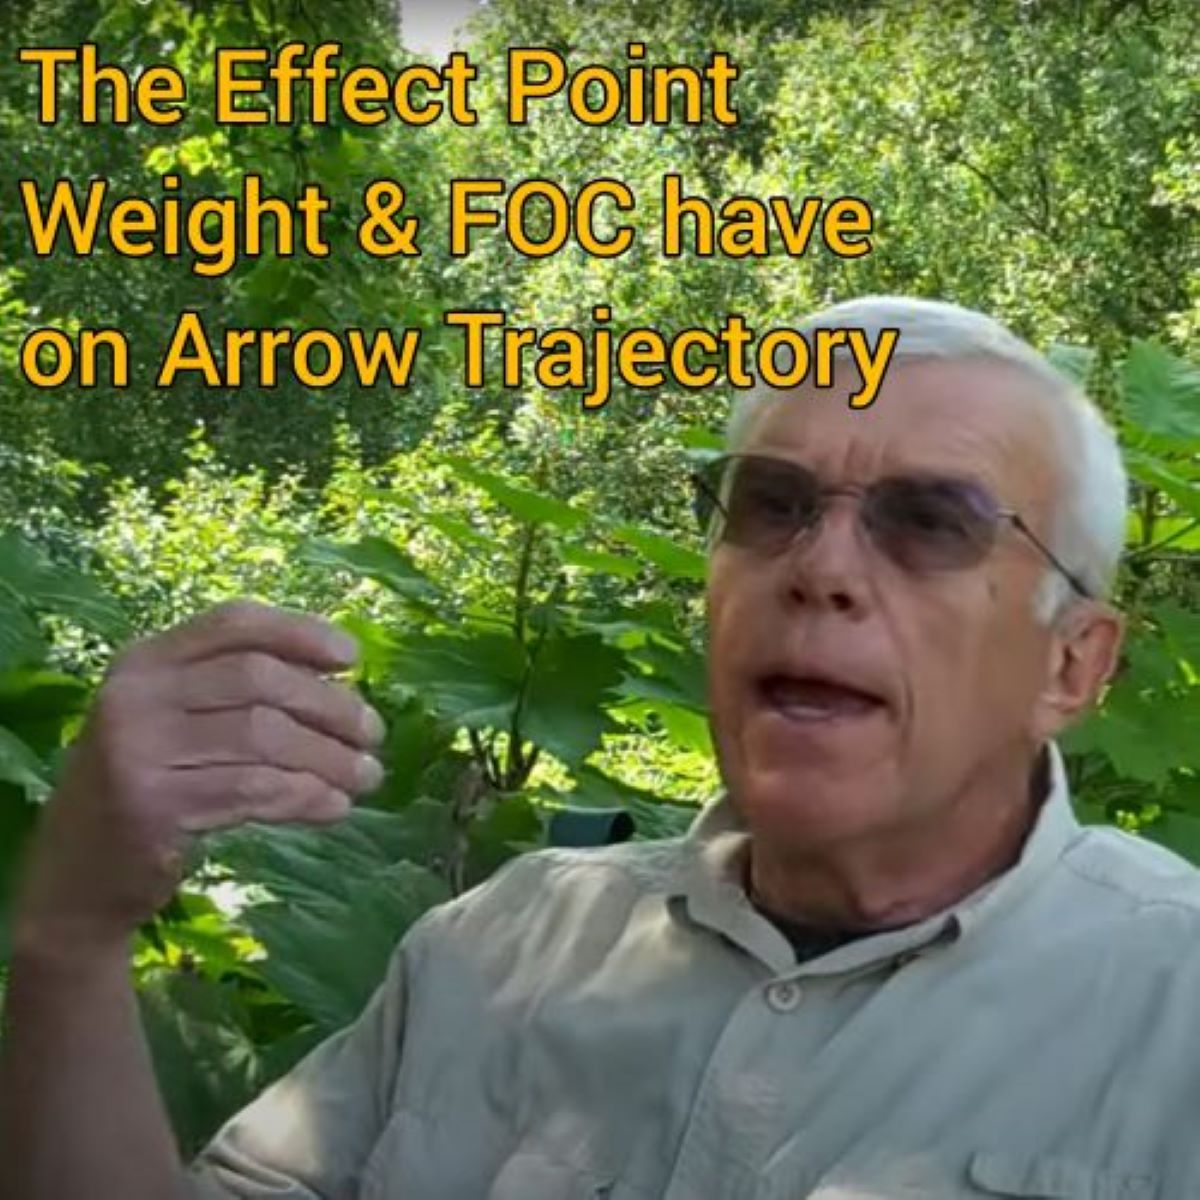 GrizzlyStik Founder demonstrates the effect of point weight & FOC on arrow trajectory.